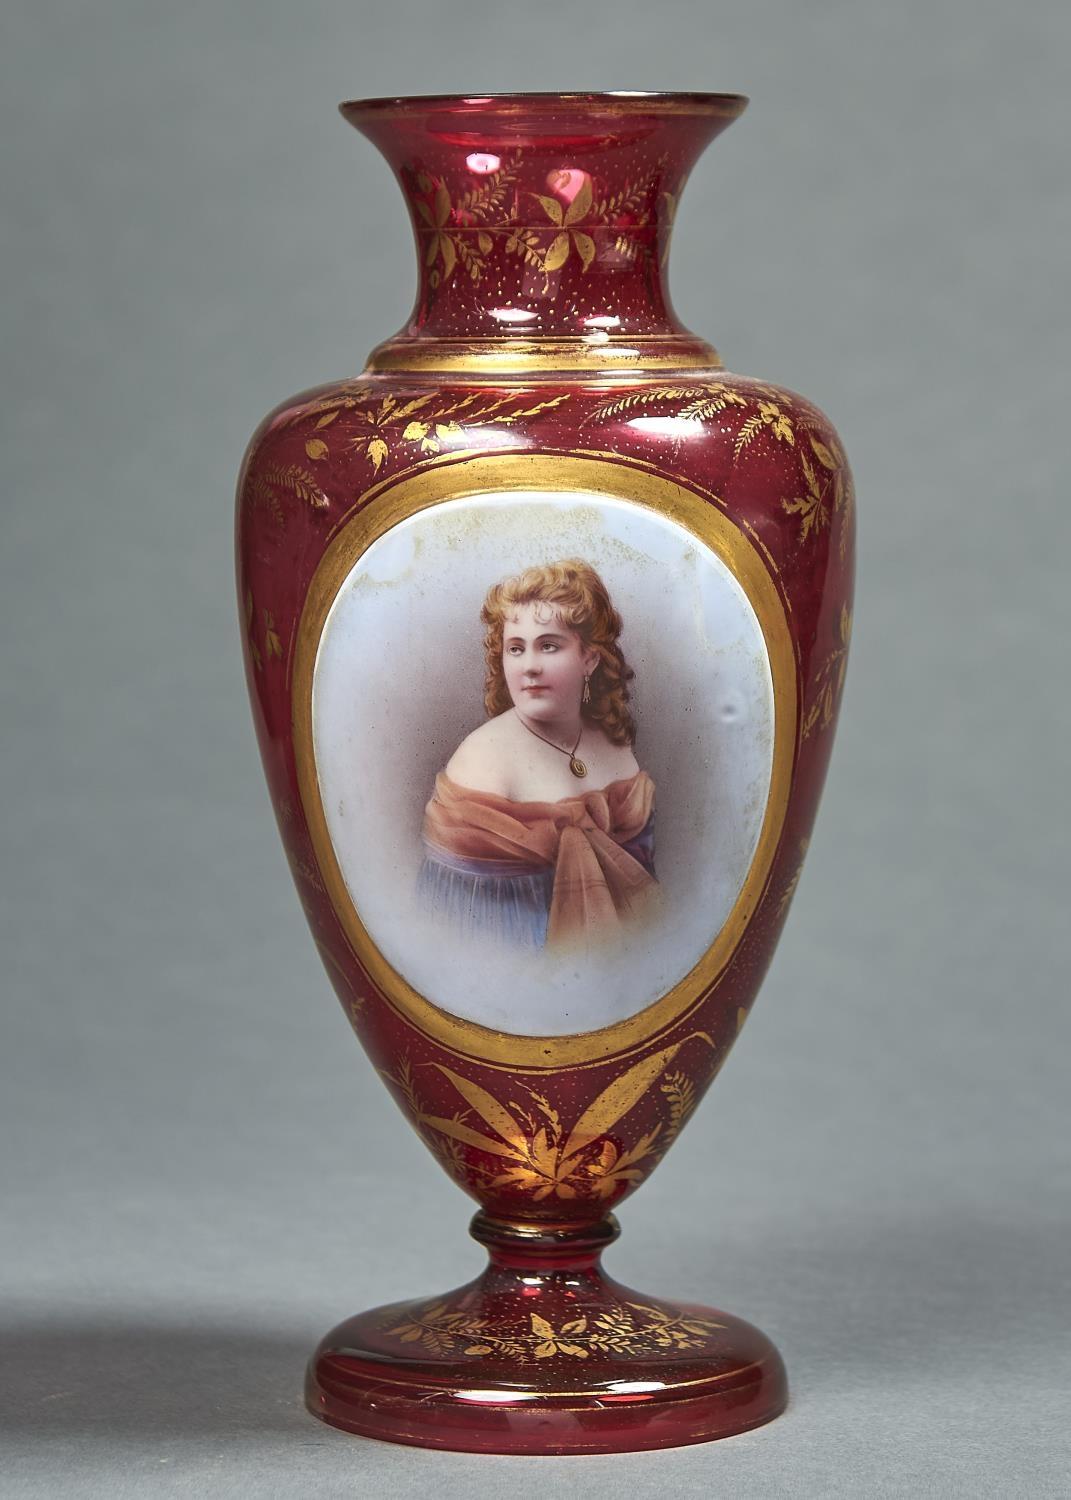 A BOHEMIAN OVERLAY GLASS VASE, C1870, OF SHOULDERED FORM, PAINTED WITH A HALF LENGTH PORTRAIT OF A